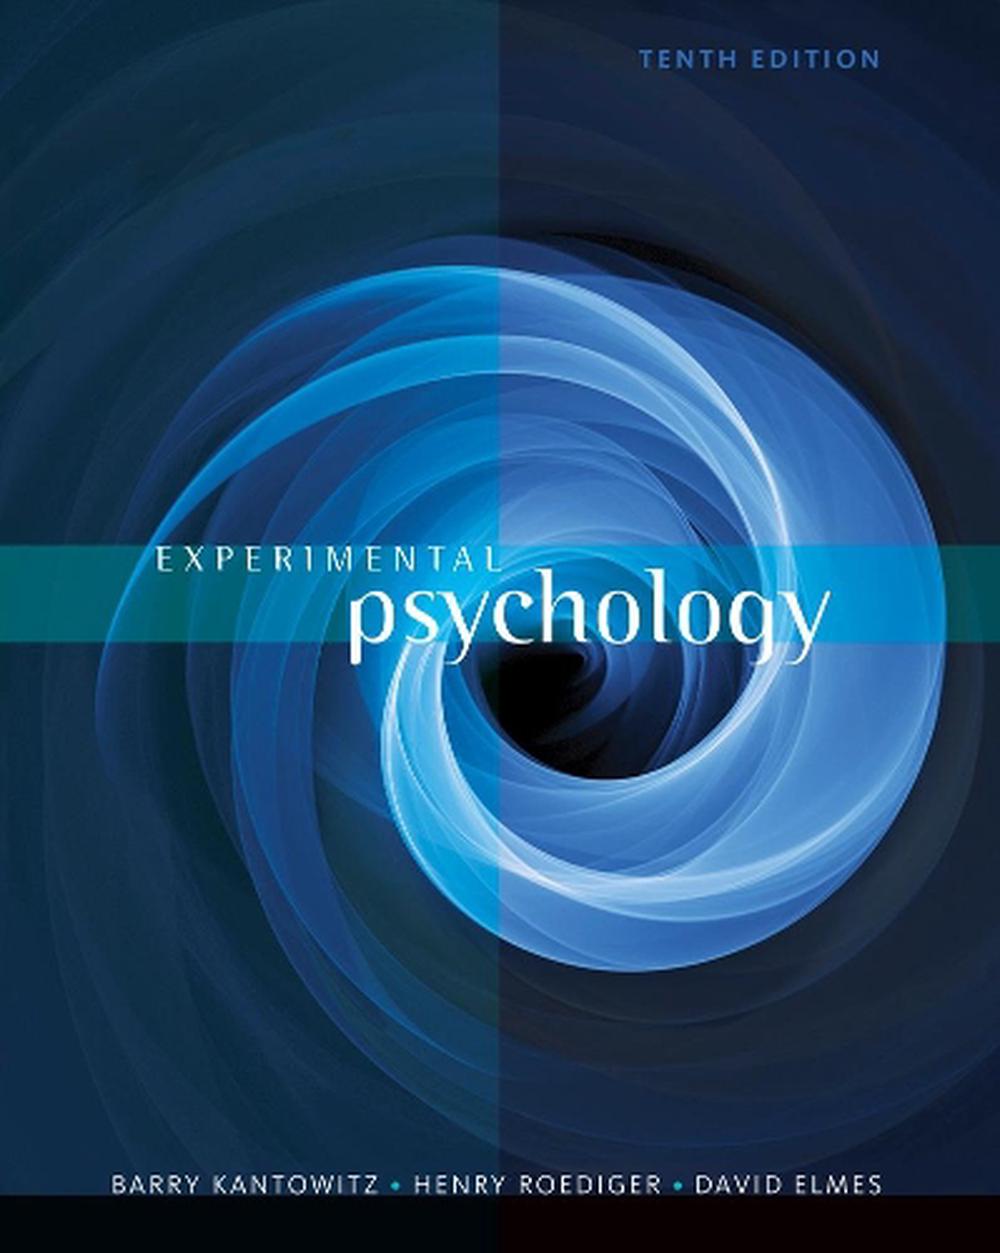 famous experimental research studies in psychology